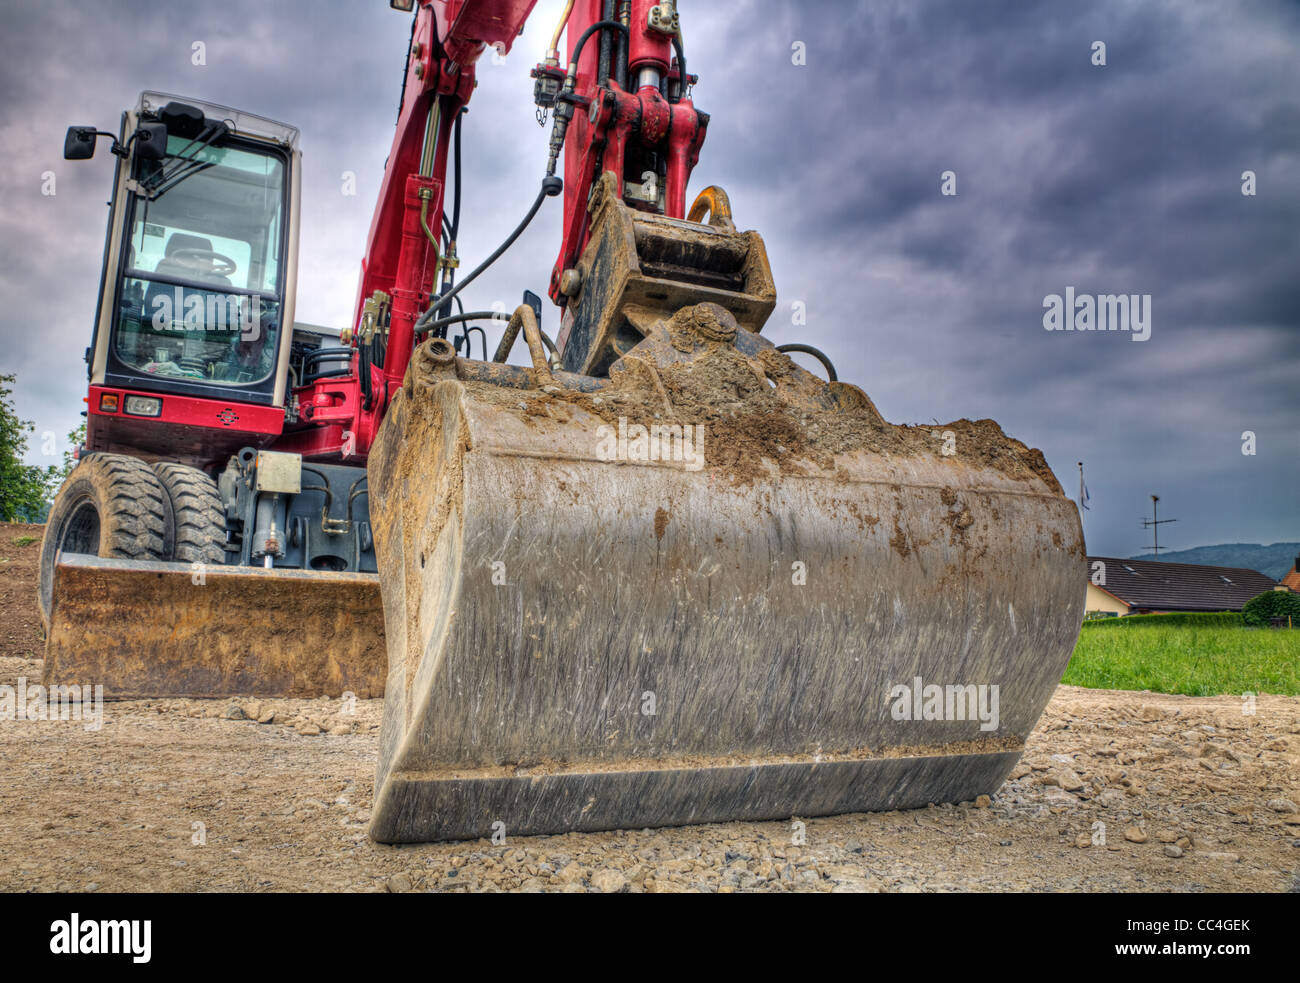 digger showing menacing strength, power, size, weight of this road construction vehicle Stock Photo